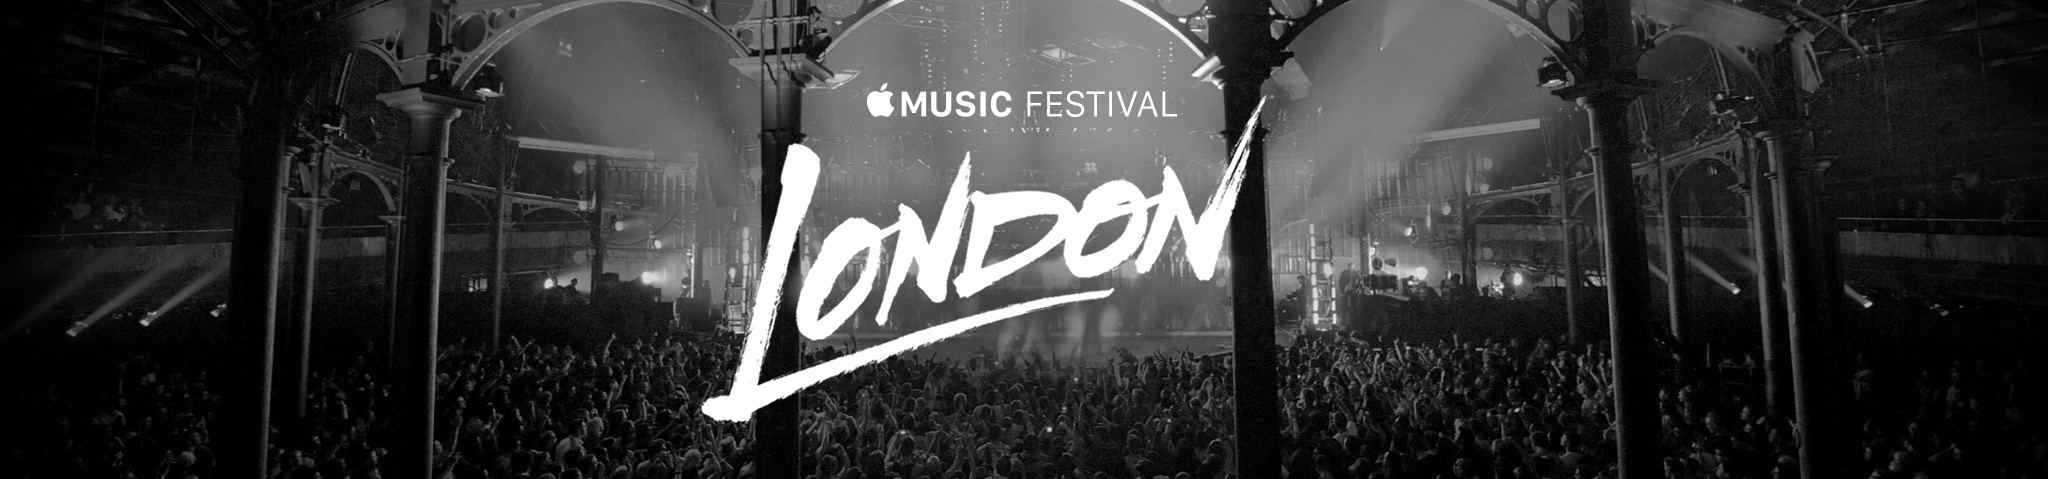 Apple announces Ellie Goulding at the opening of the Music Festival 2015 on September 19